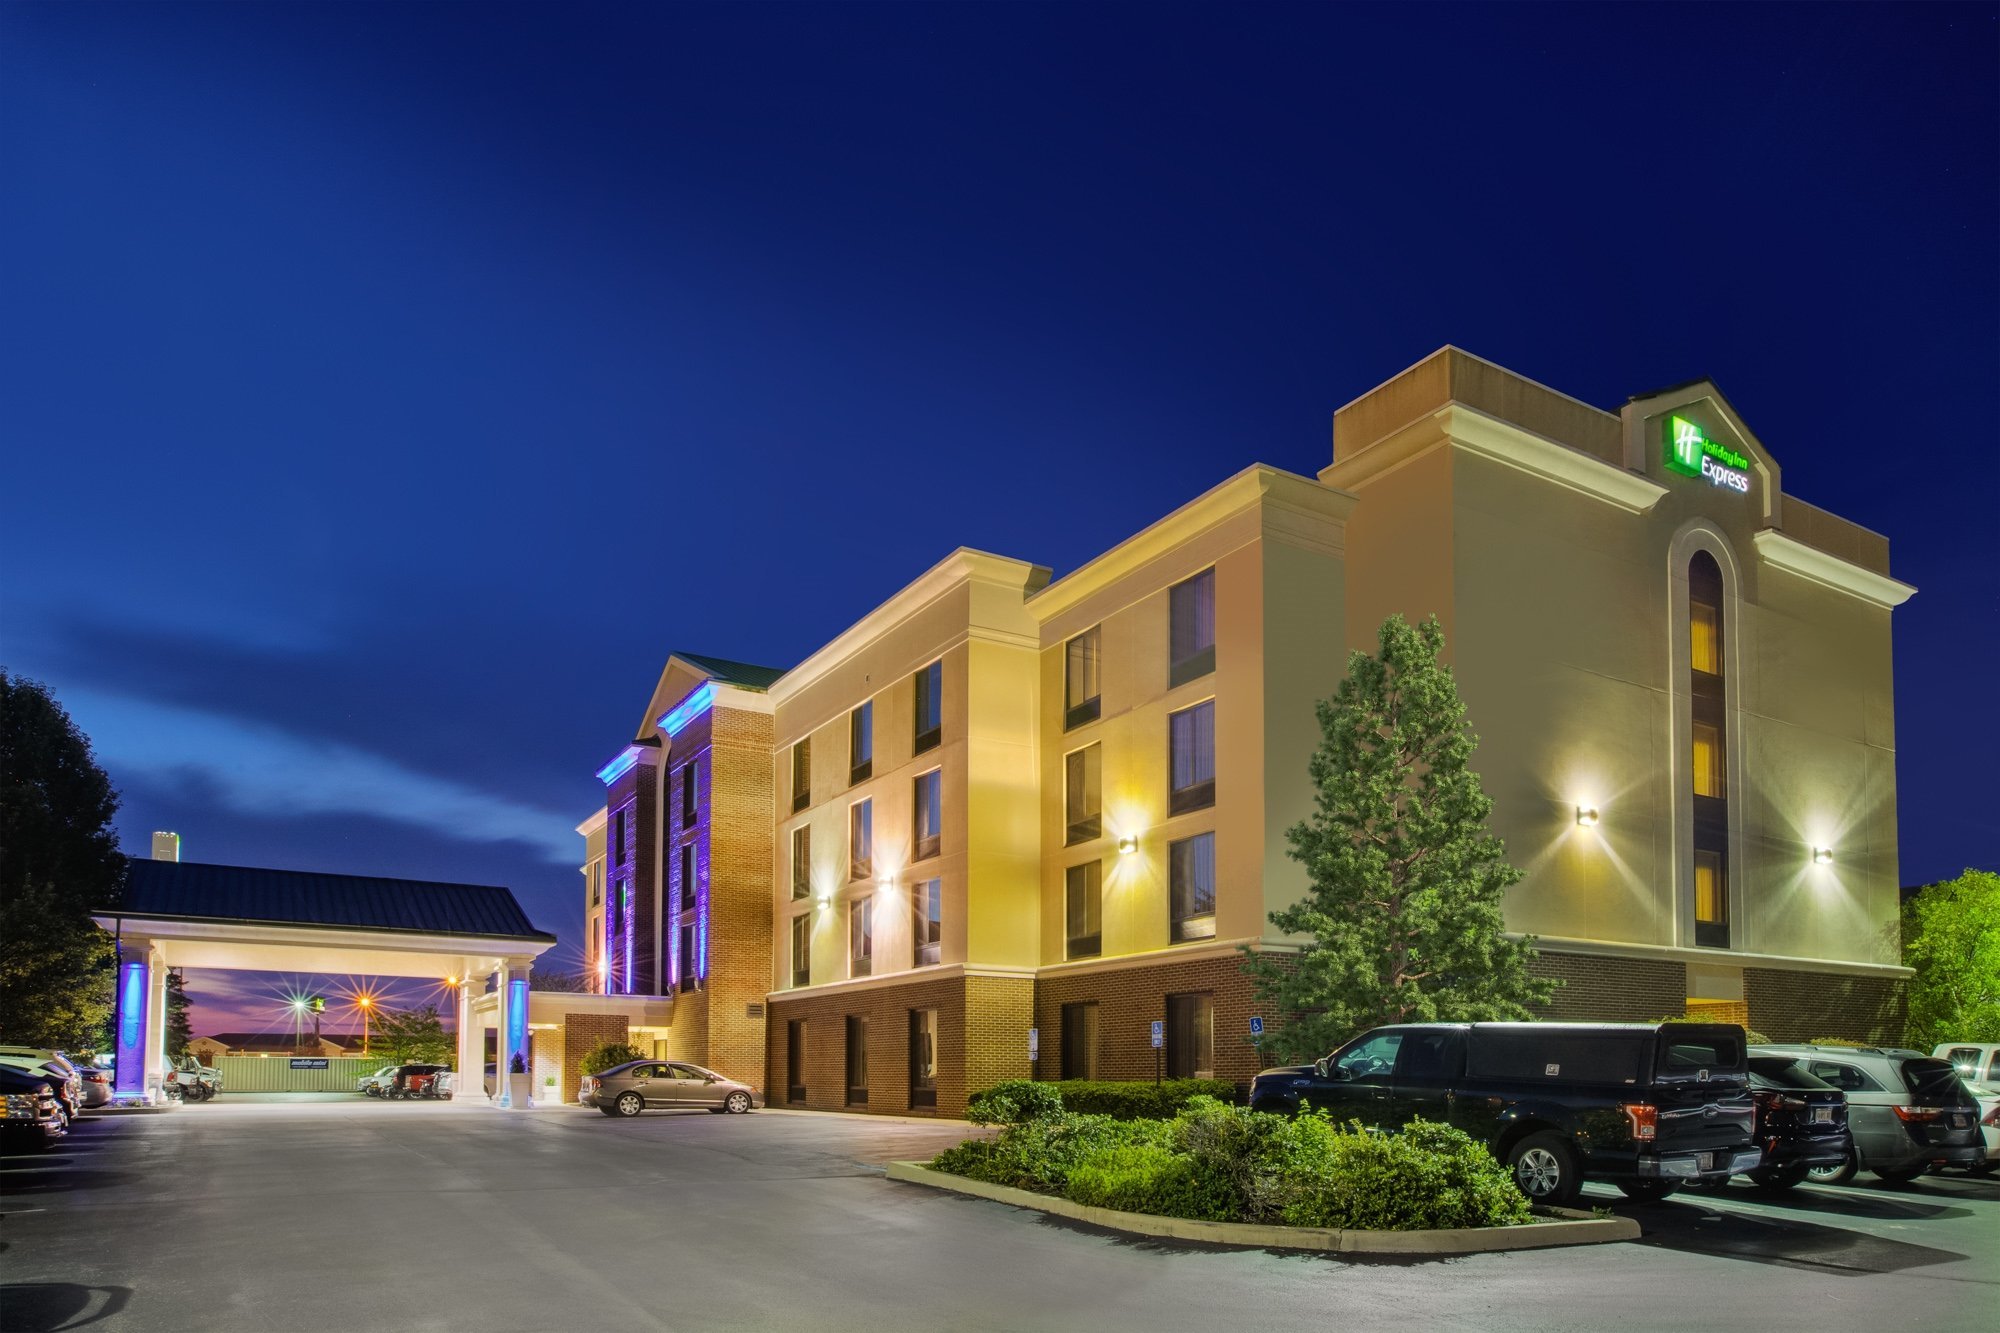 Photo of Holiday Inn Express & Suites Fort Wayne, Fort Wayne, IN